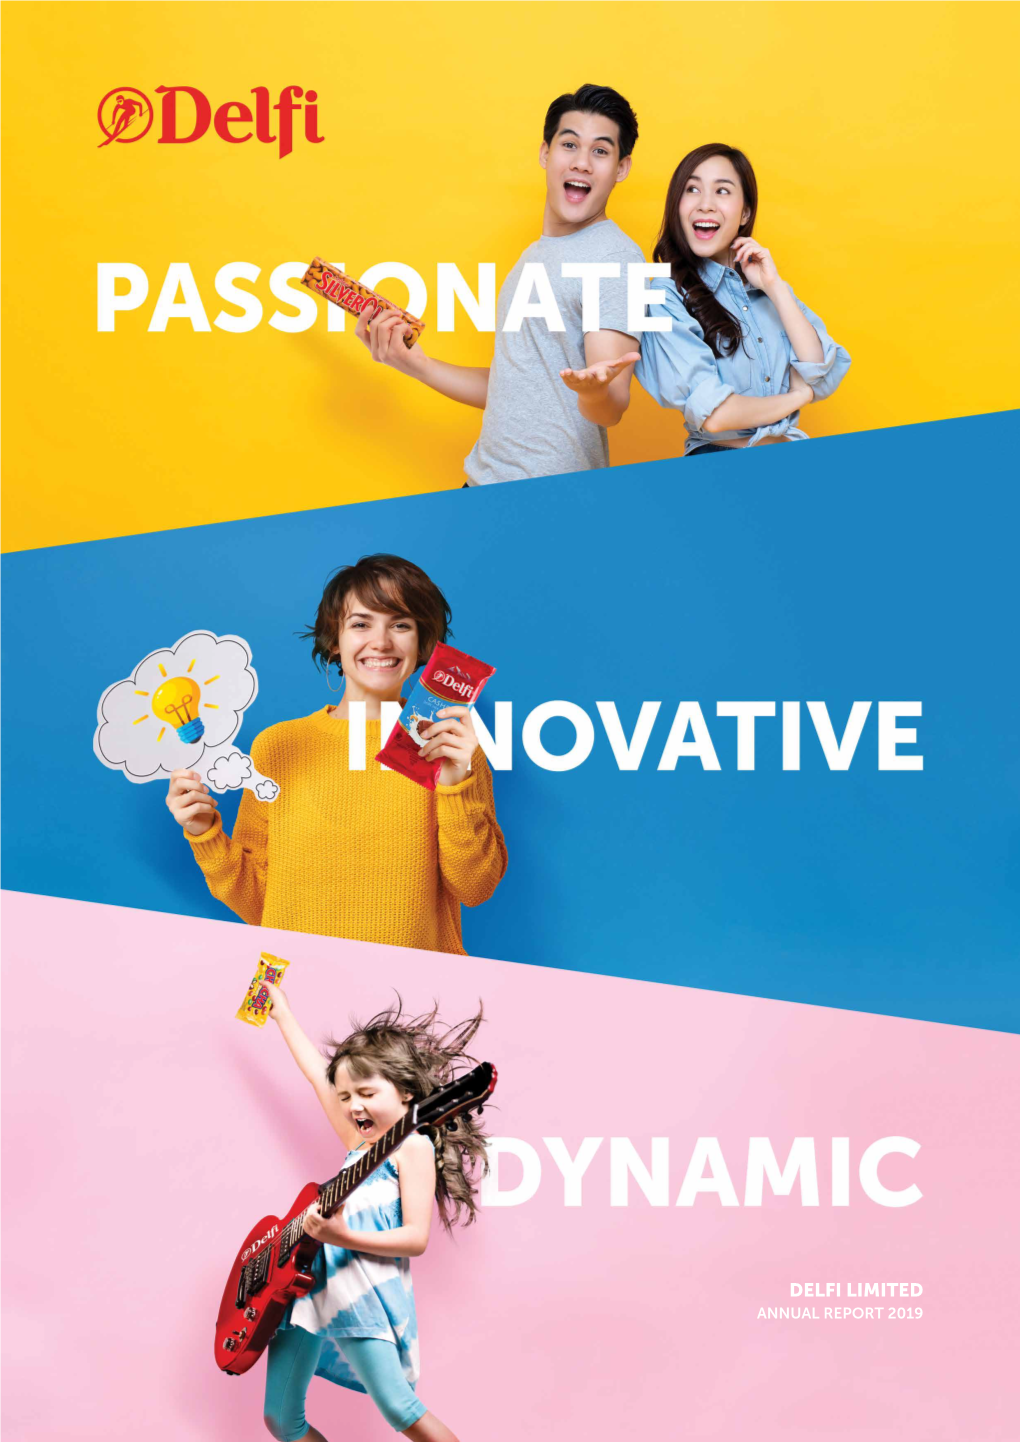 ANNUAL REPORT 2019 DELFI LIMITED ANNUAL REPORT 2019 Passionate, Innovative, Dynamic – These Qualities Define the Delfi Spirit